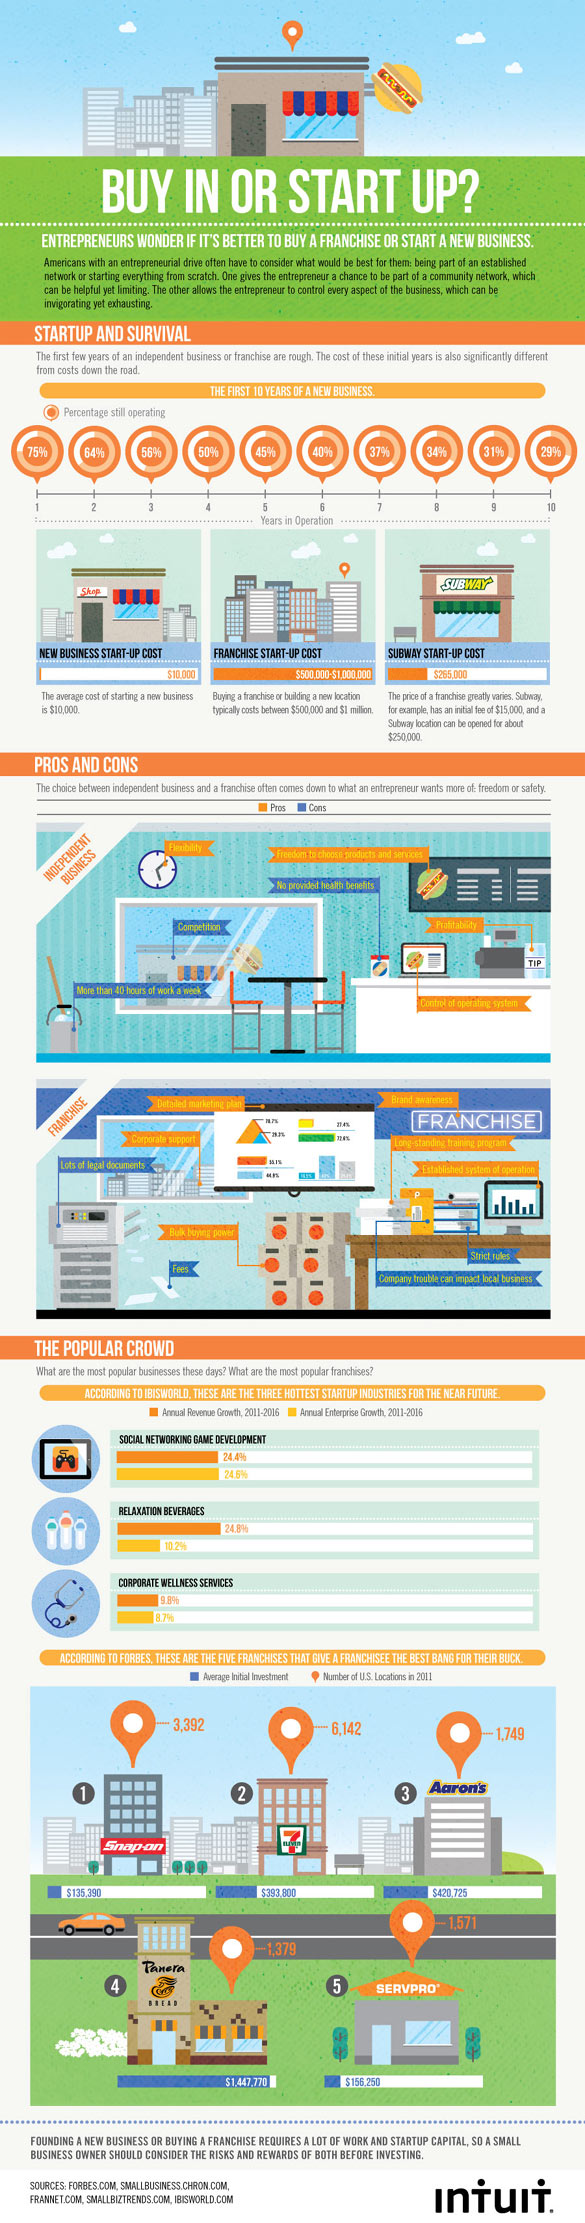 franchising infographic